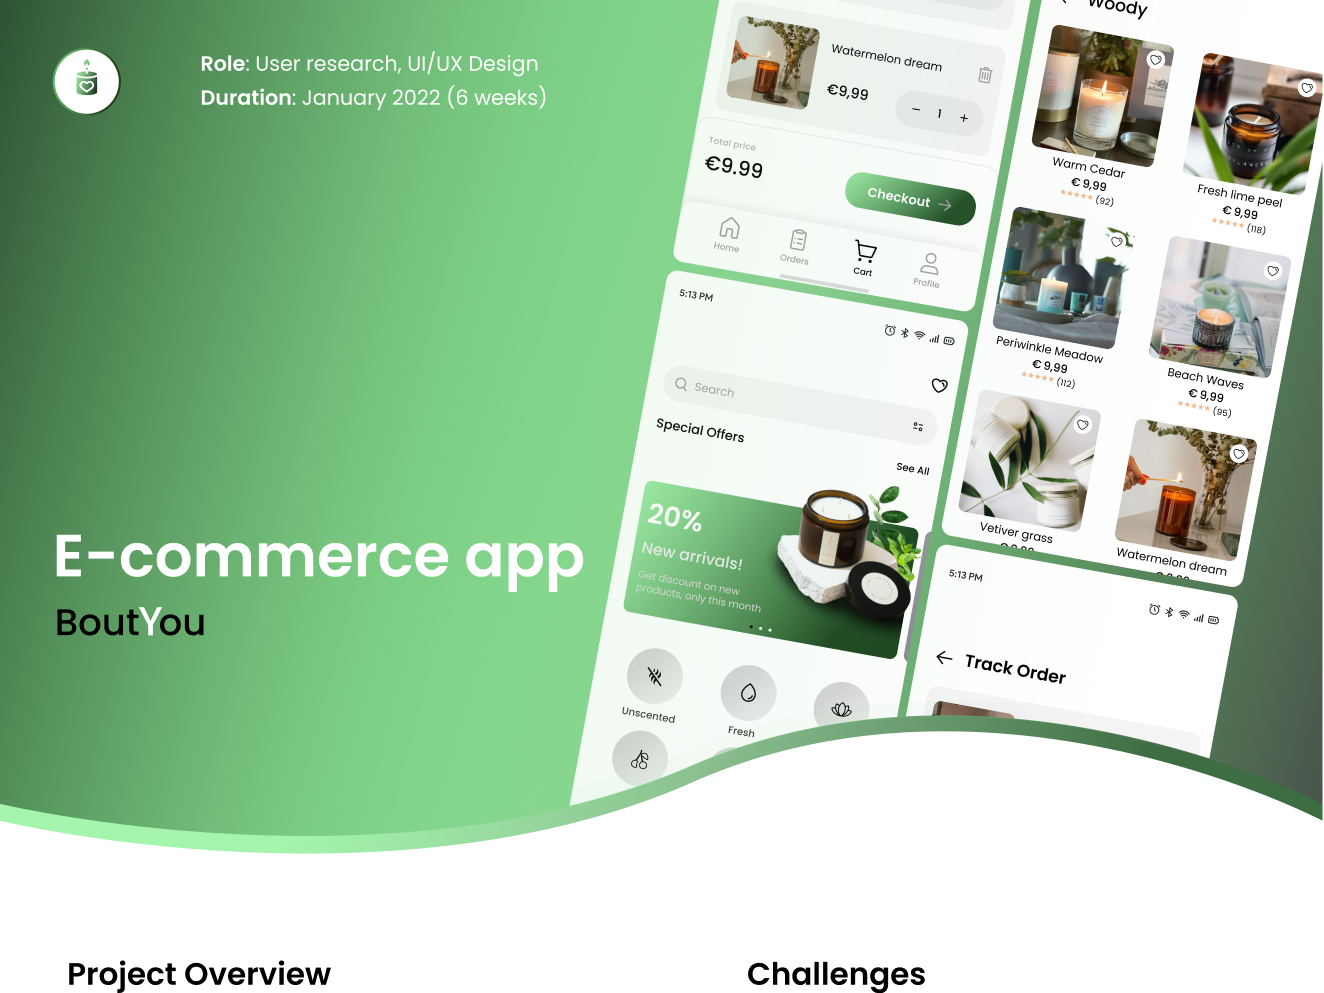 Role: User research, UI/UX Design
Duration: January 2022 (6 weeks)

E-commerce app

 

Project Overview Challenges